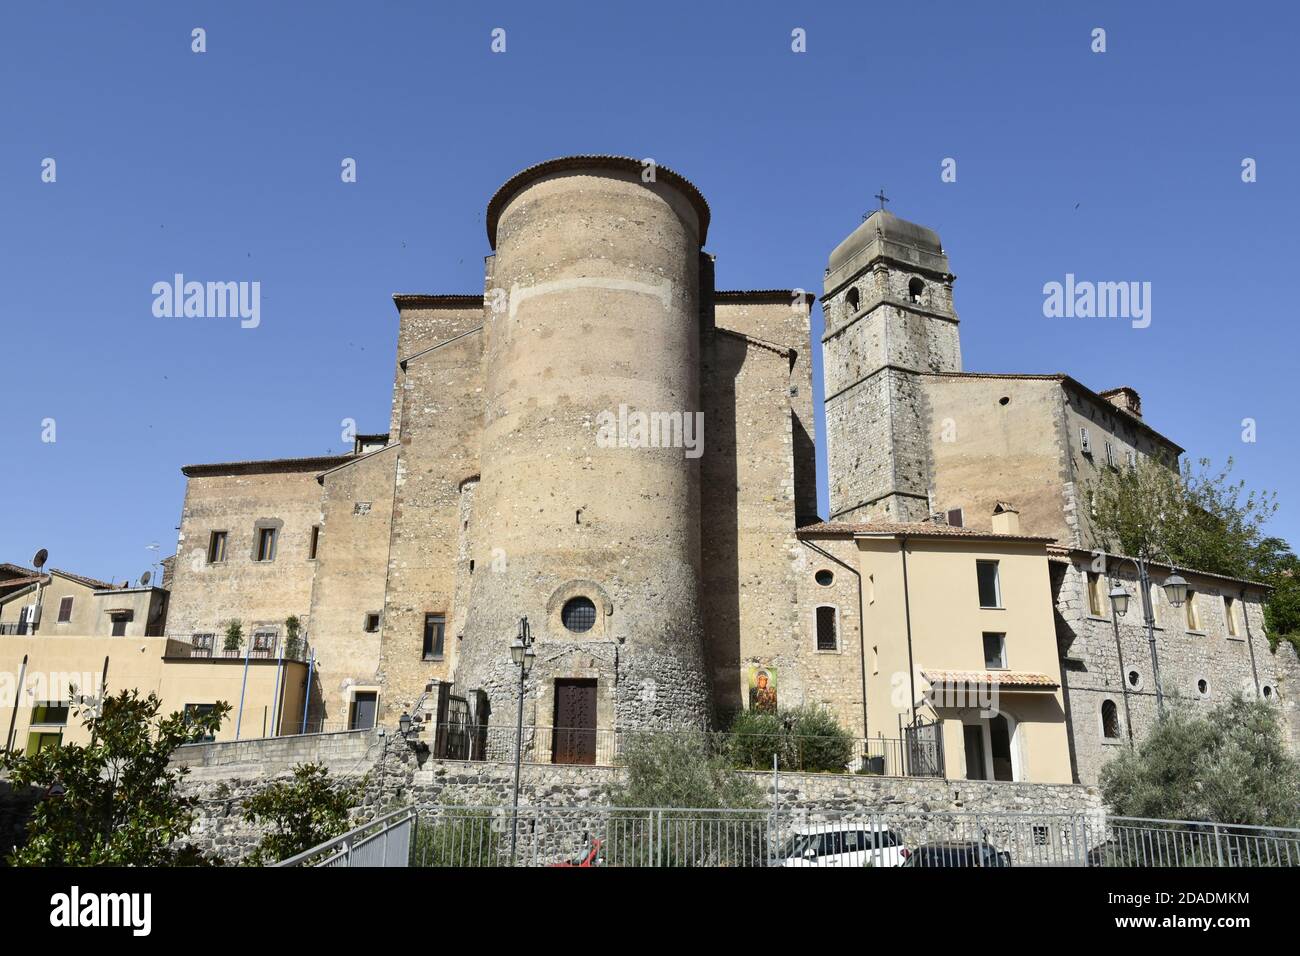 Panoramic view of Giuliano di Roma, a medieval village in the mountains of the Lazio region, Italy. Stock Photo